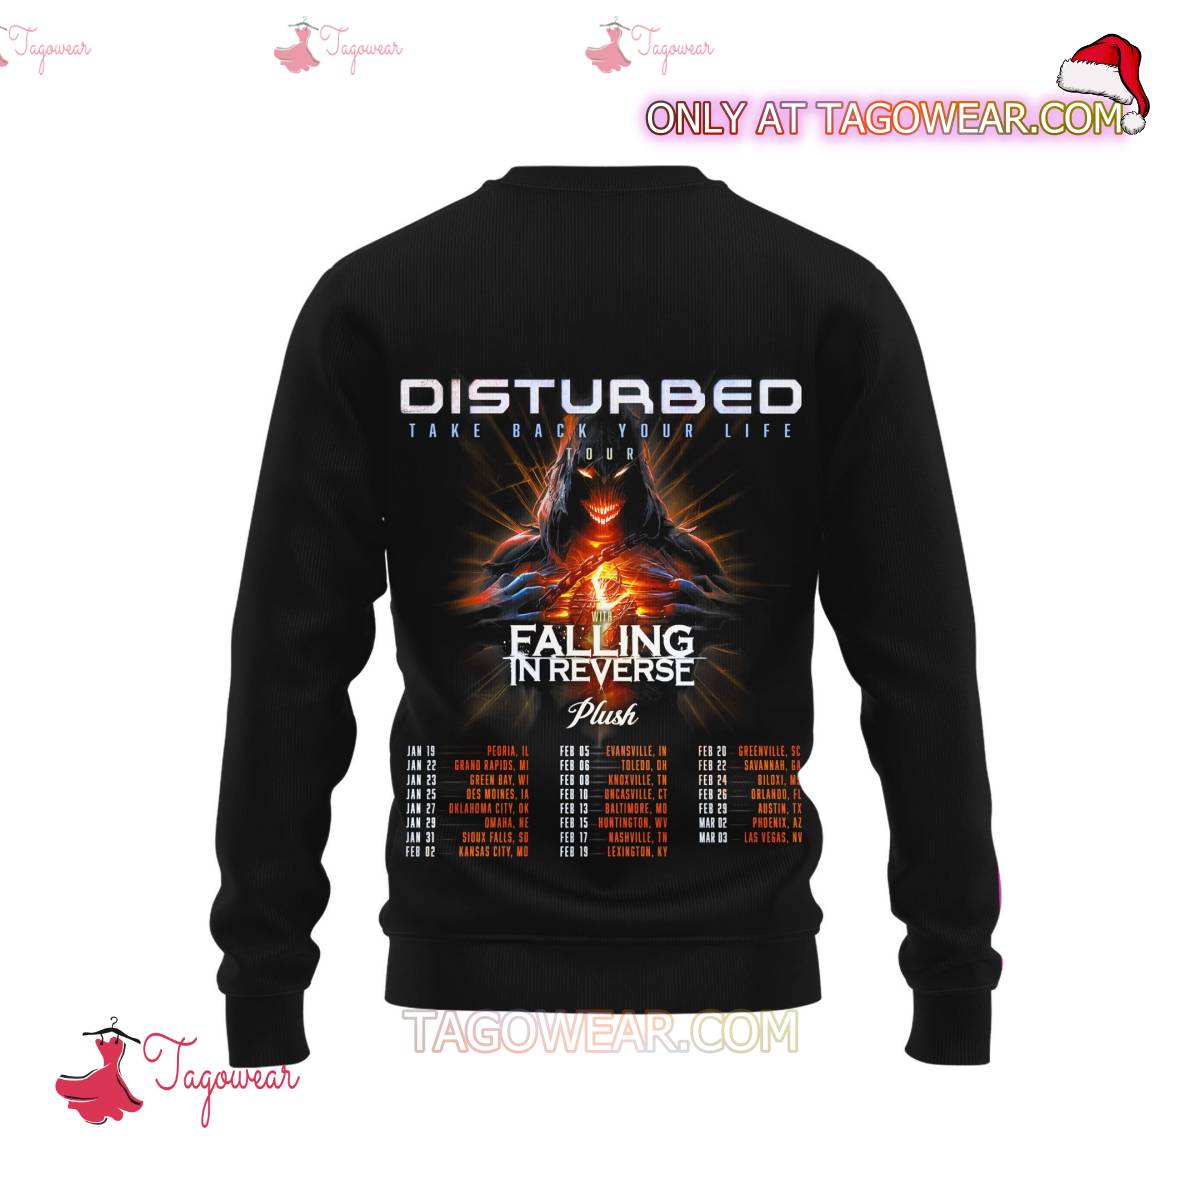 Disturbed Take Back Your Life Tour With Falling In Reverse T-shirt, Hoodie b